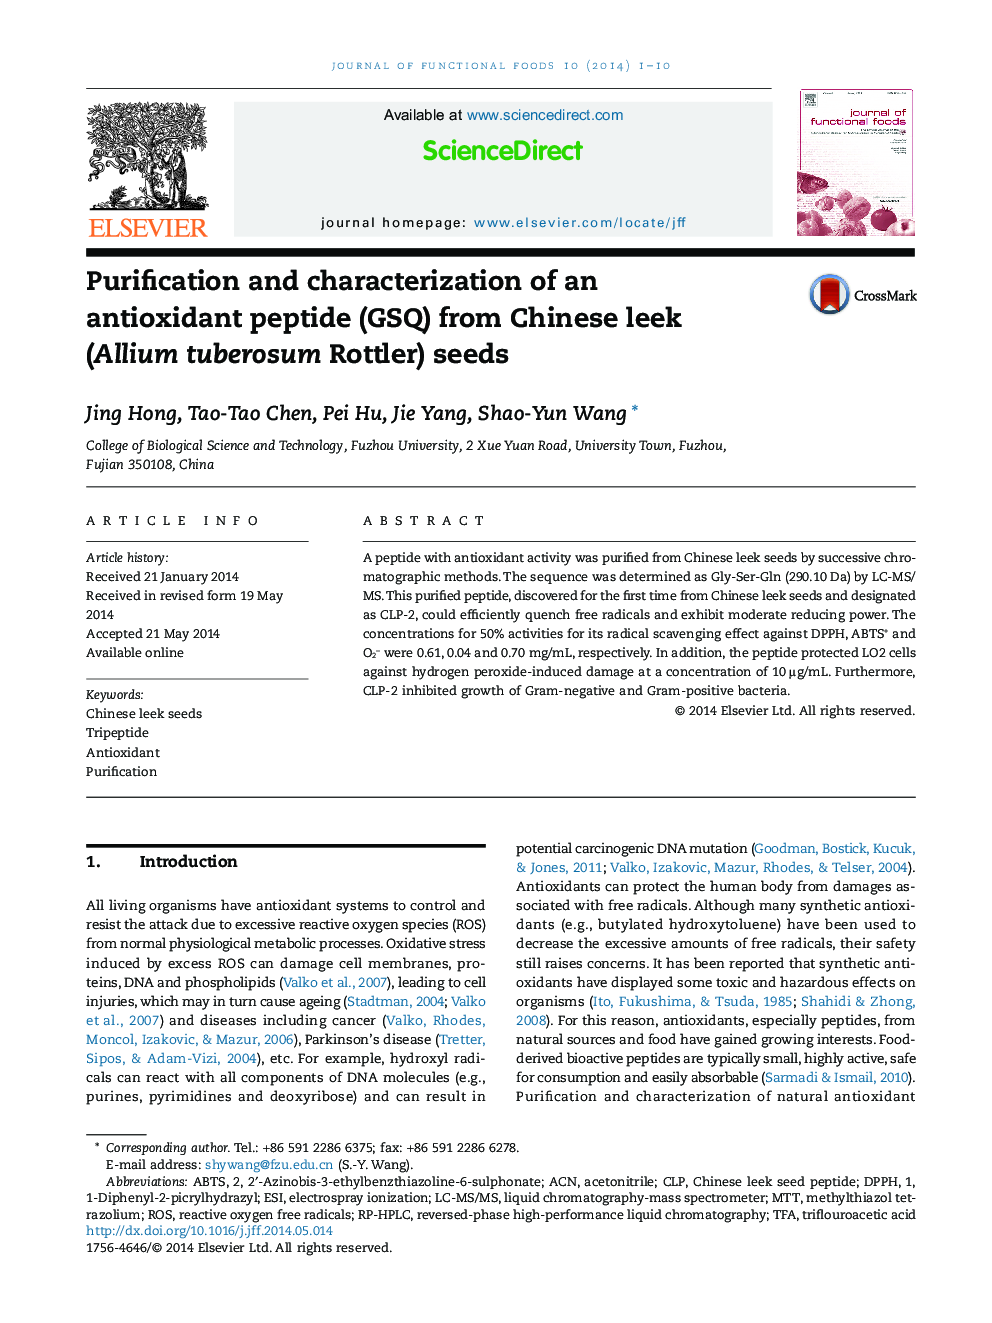 Purification and characterization of an antioxidant peptide (GSQ) from Chinese leek (Allium tuberosum Rottler) seeds